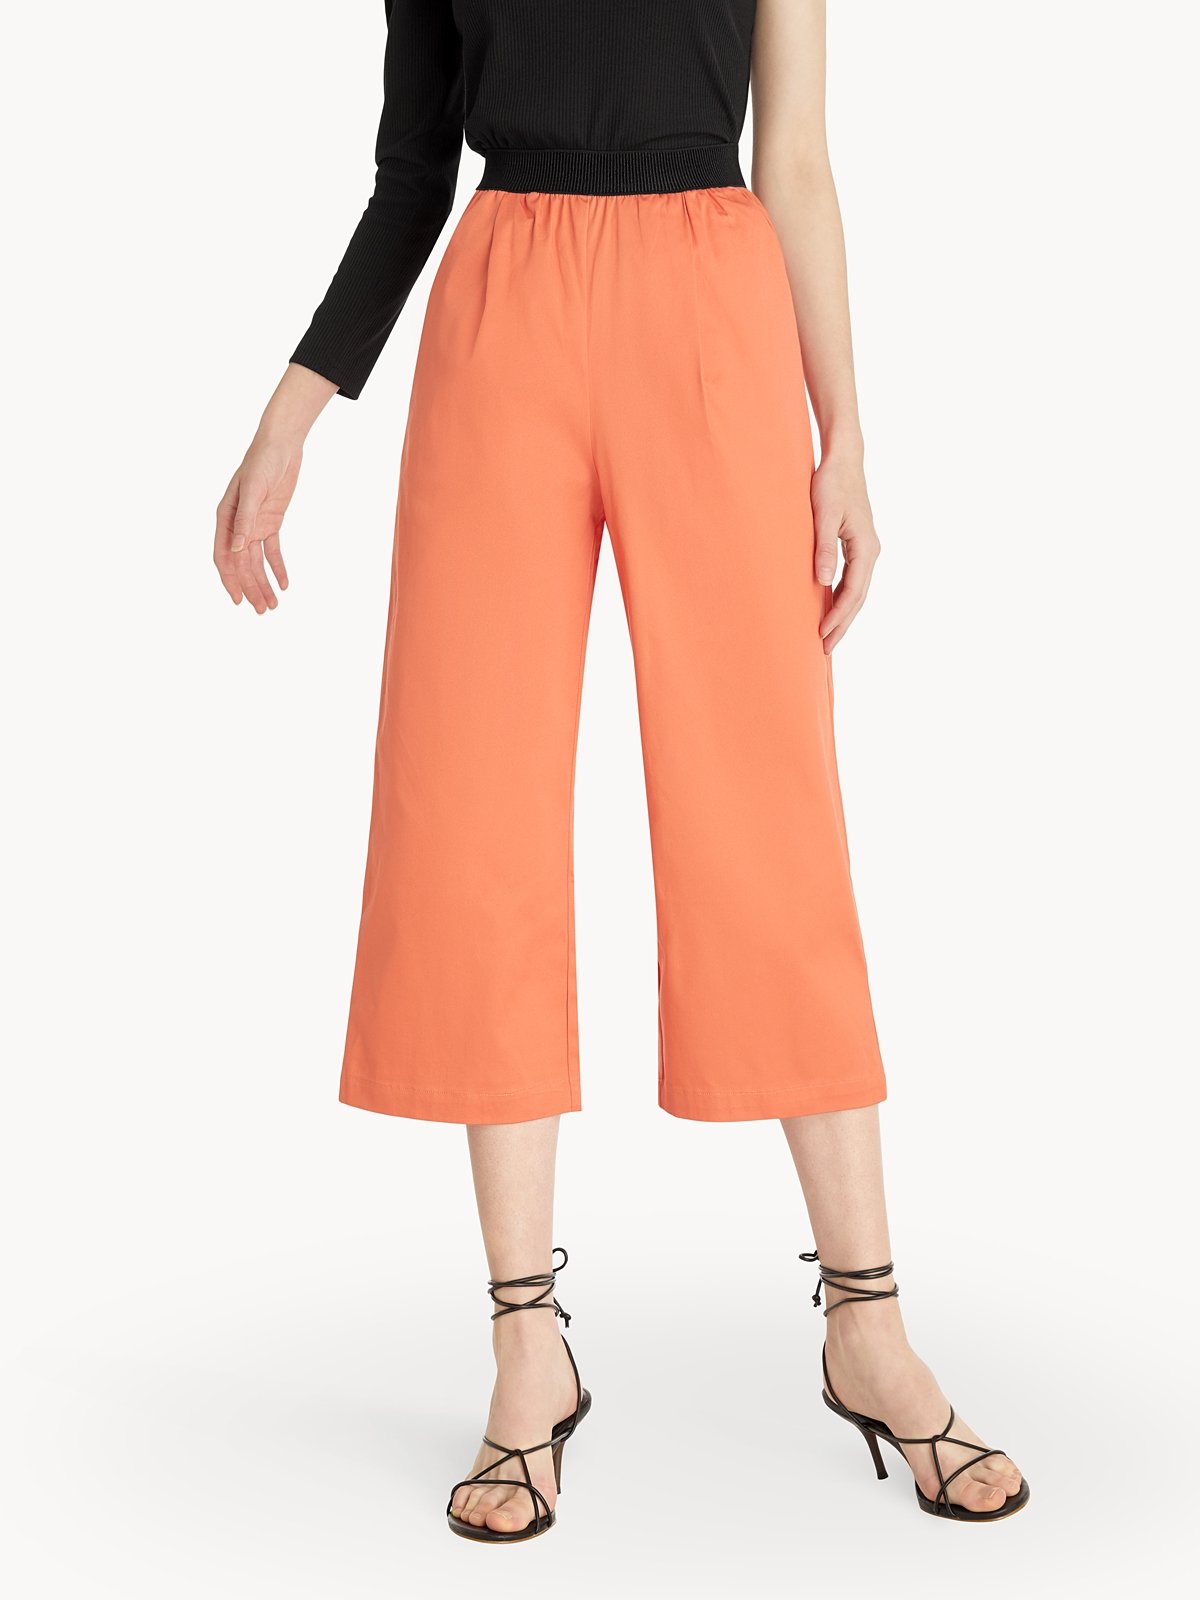 Belted Pants - Peach - Pomelo Fashion